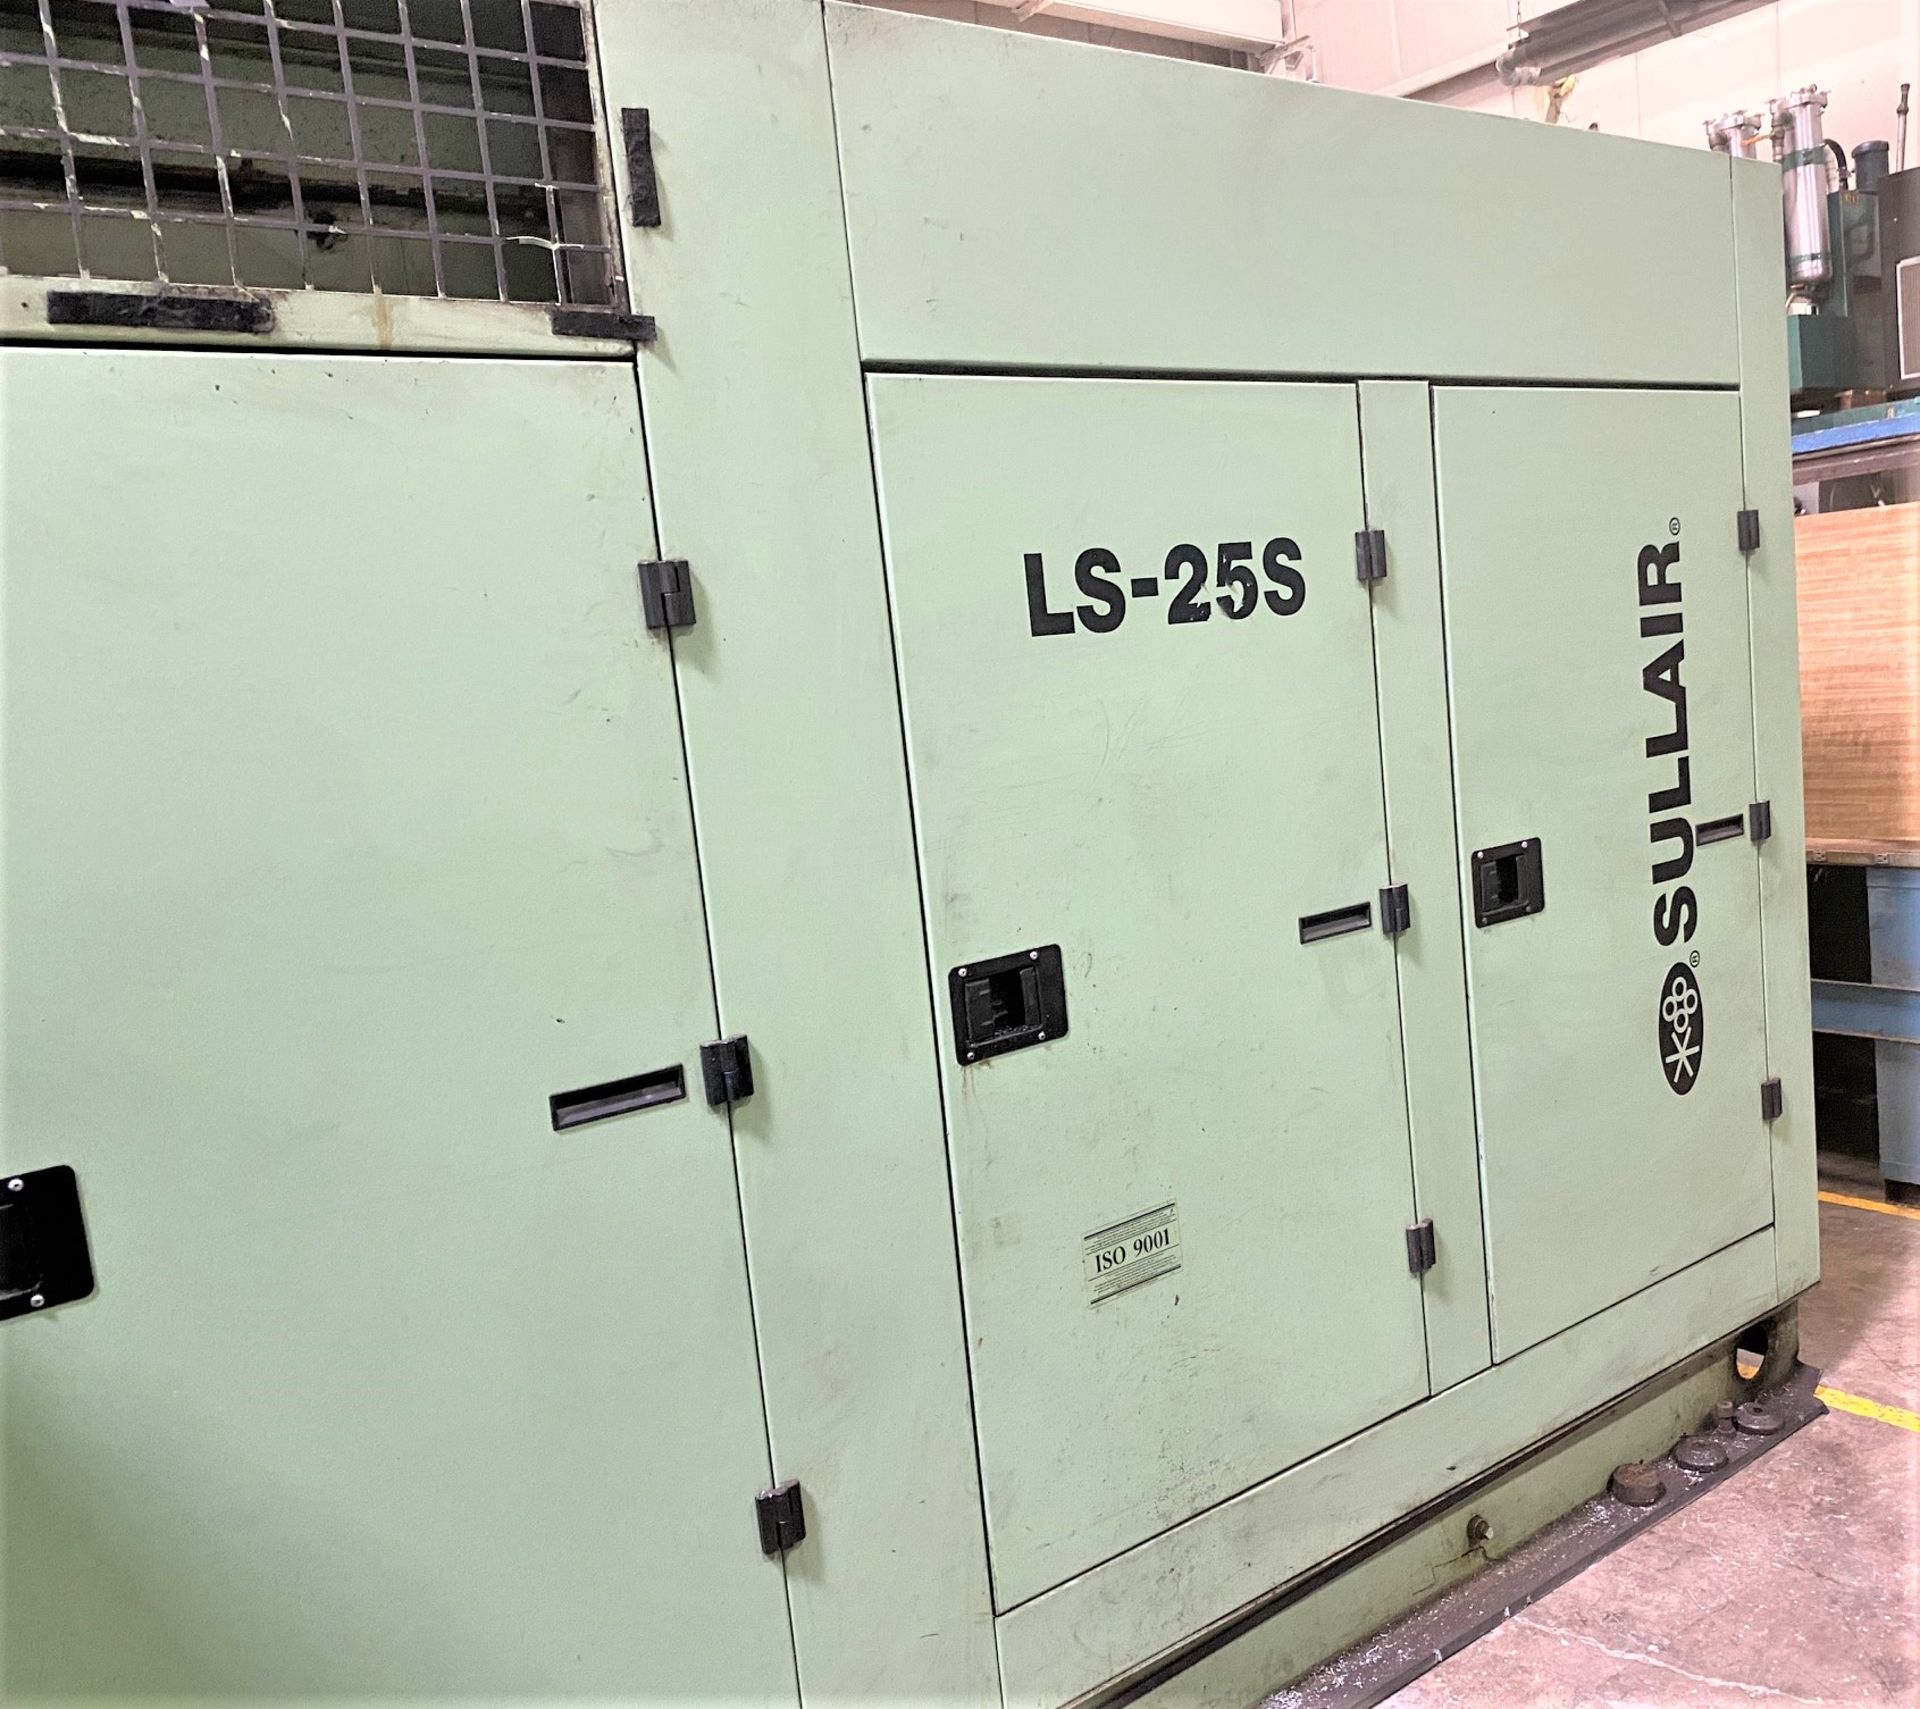 350 HP Sullair Model LS-25S-350H/A Screw Type Air Compressor, S/N 200806300092, New 2008 - Image 4 of 7